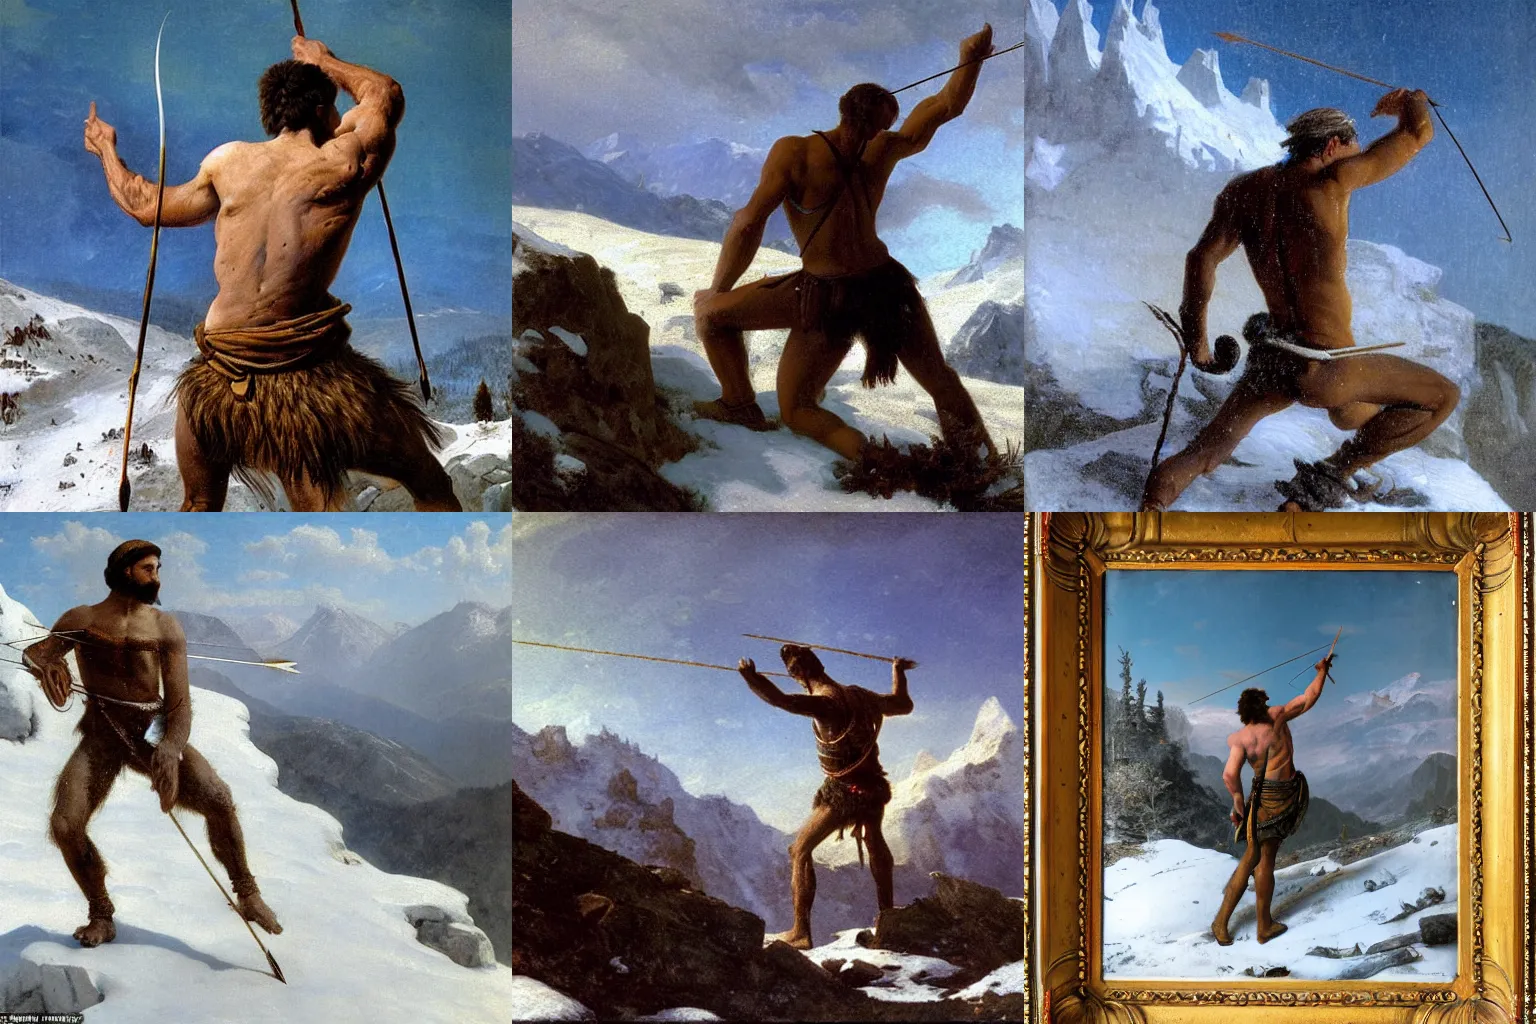 Prompt: A man during the bronze-age, Ötzi, climbs a snowclad mountain landscape with an arrow stuck in his left shoulder, photorealistic painting by Albert Bierstadt